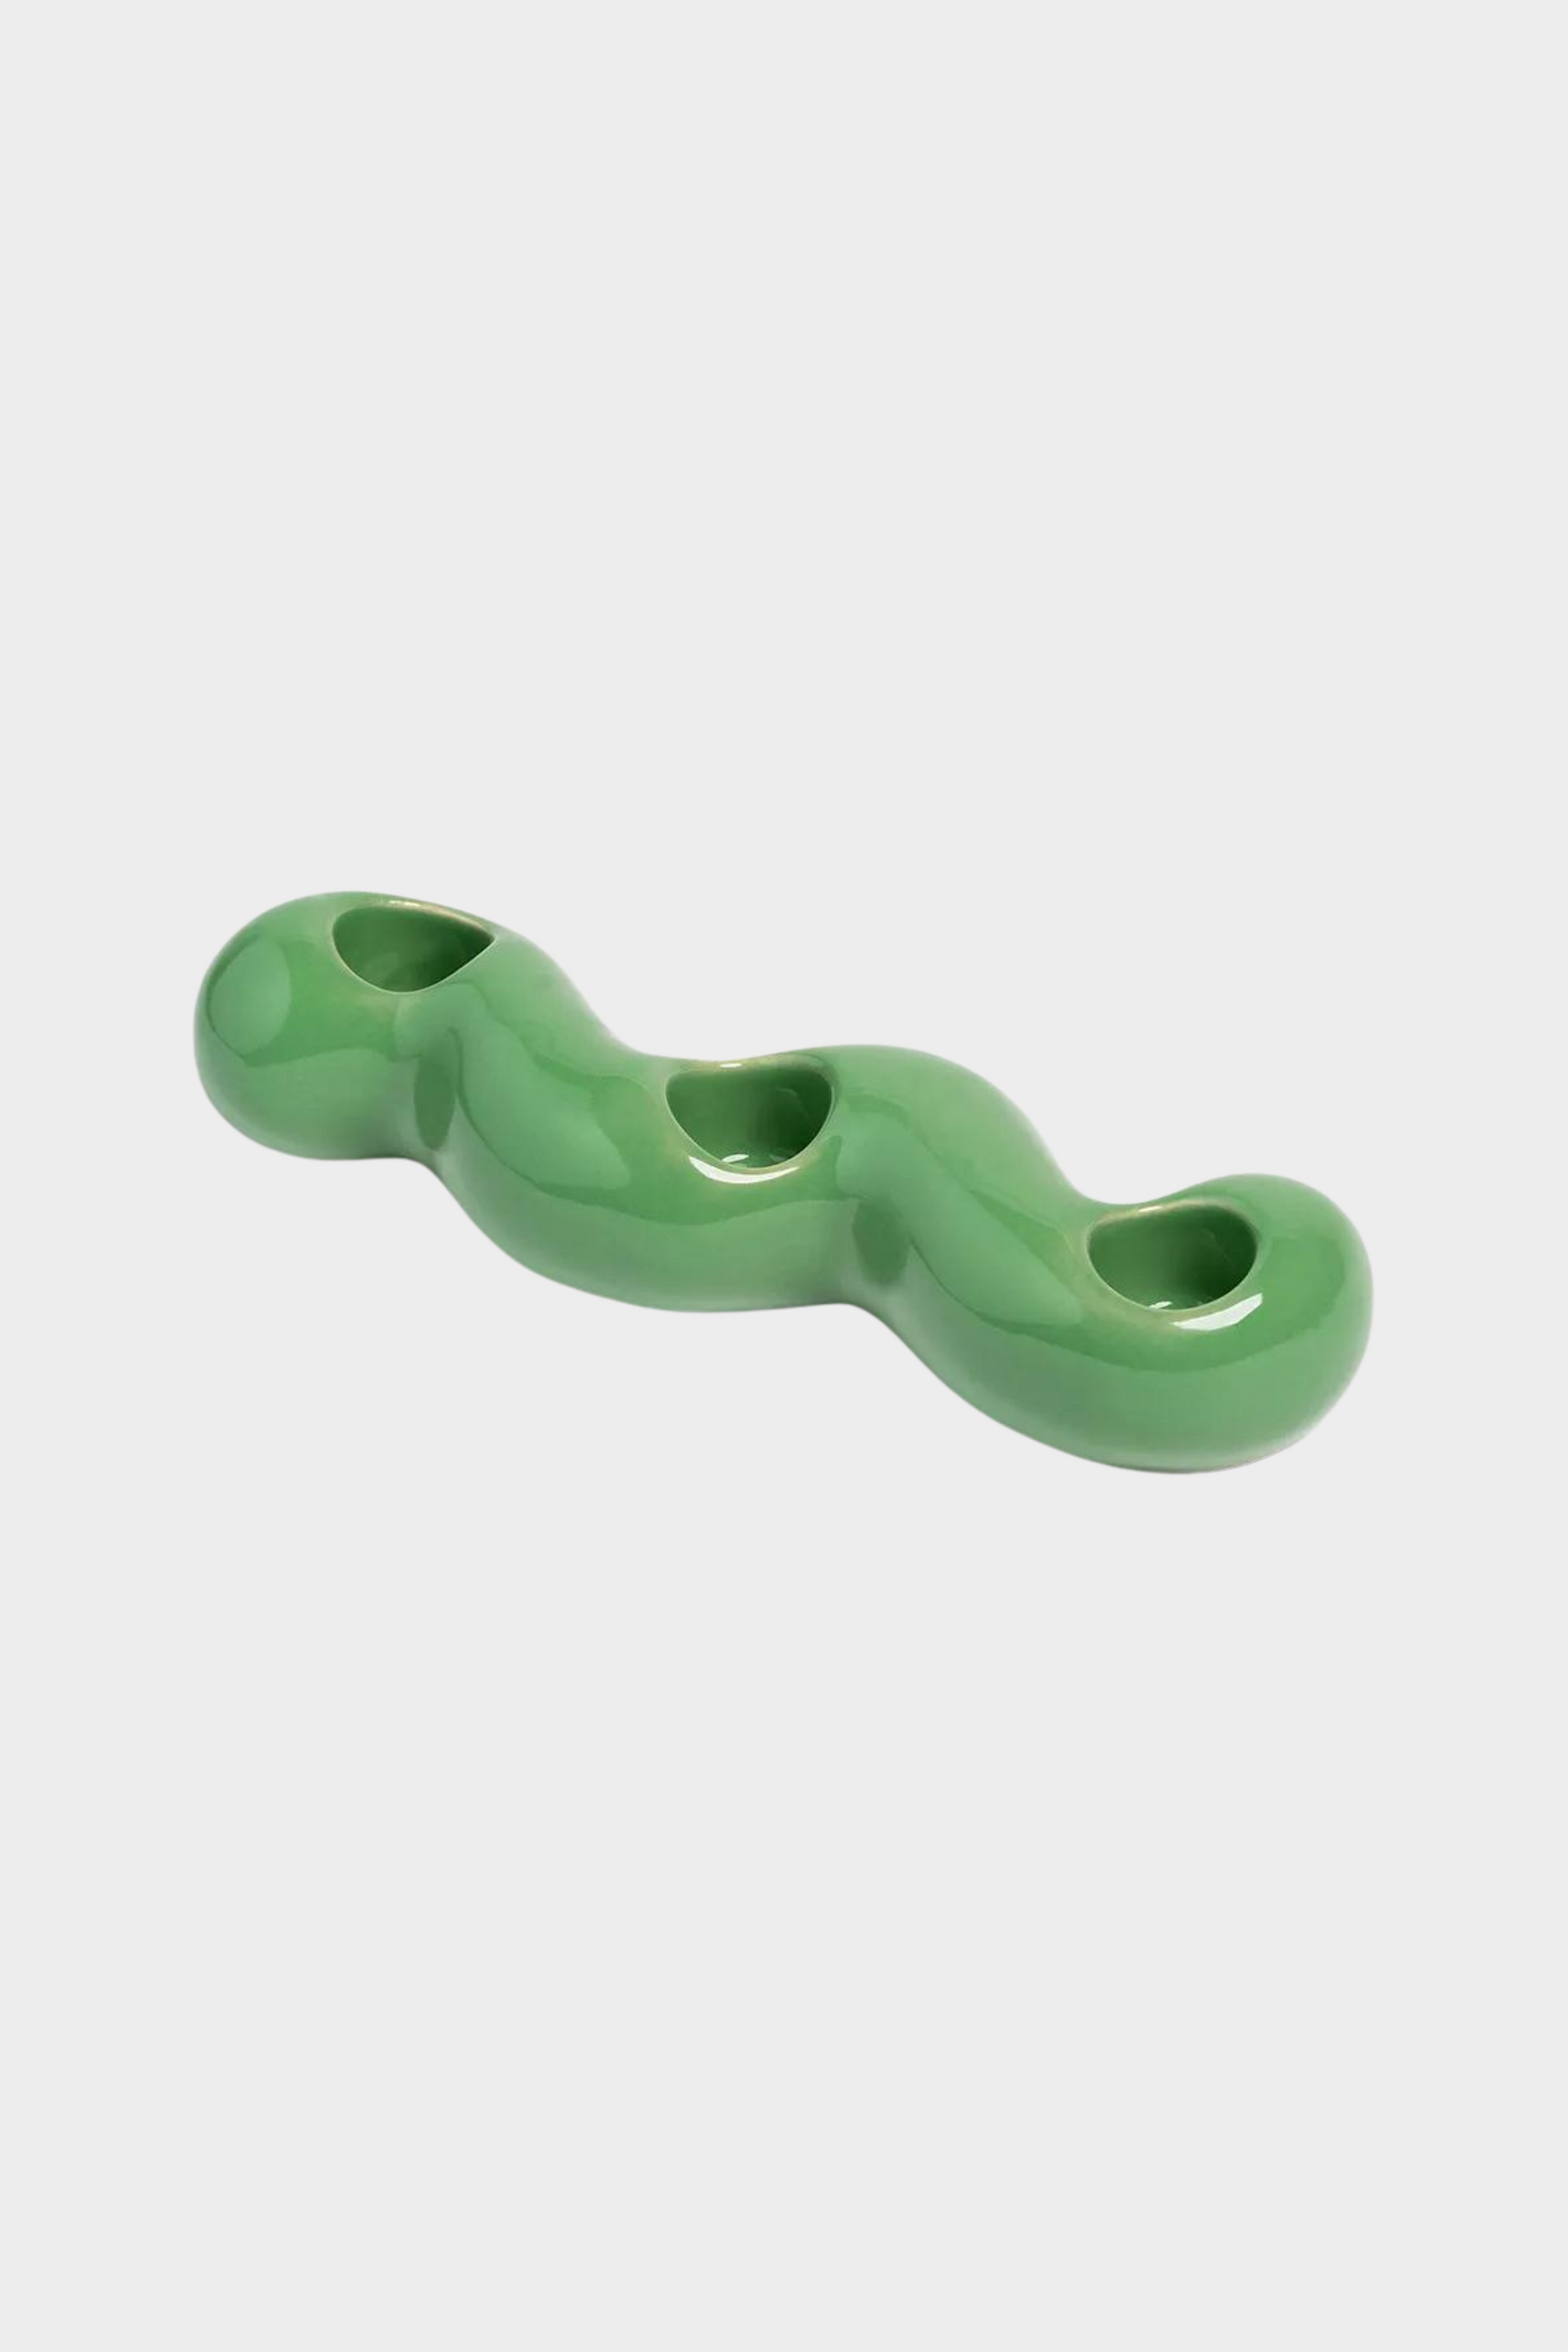 Candle Holder Scribble Green